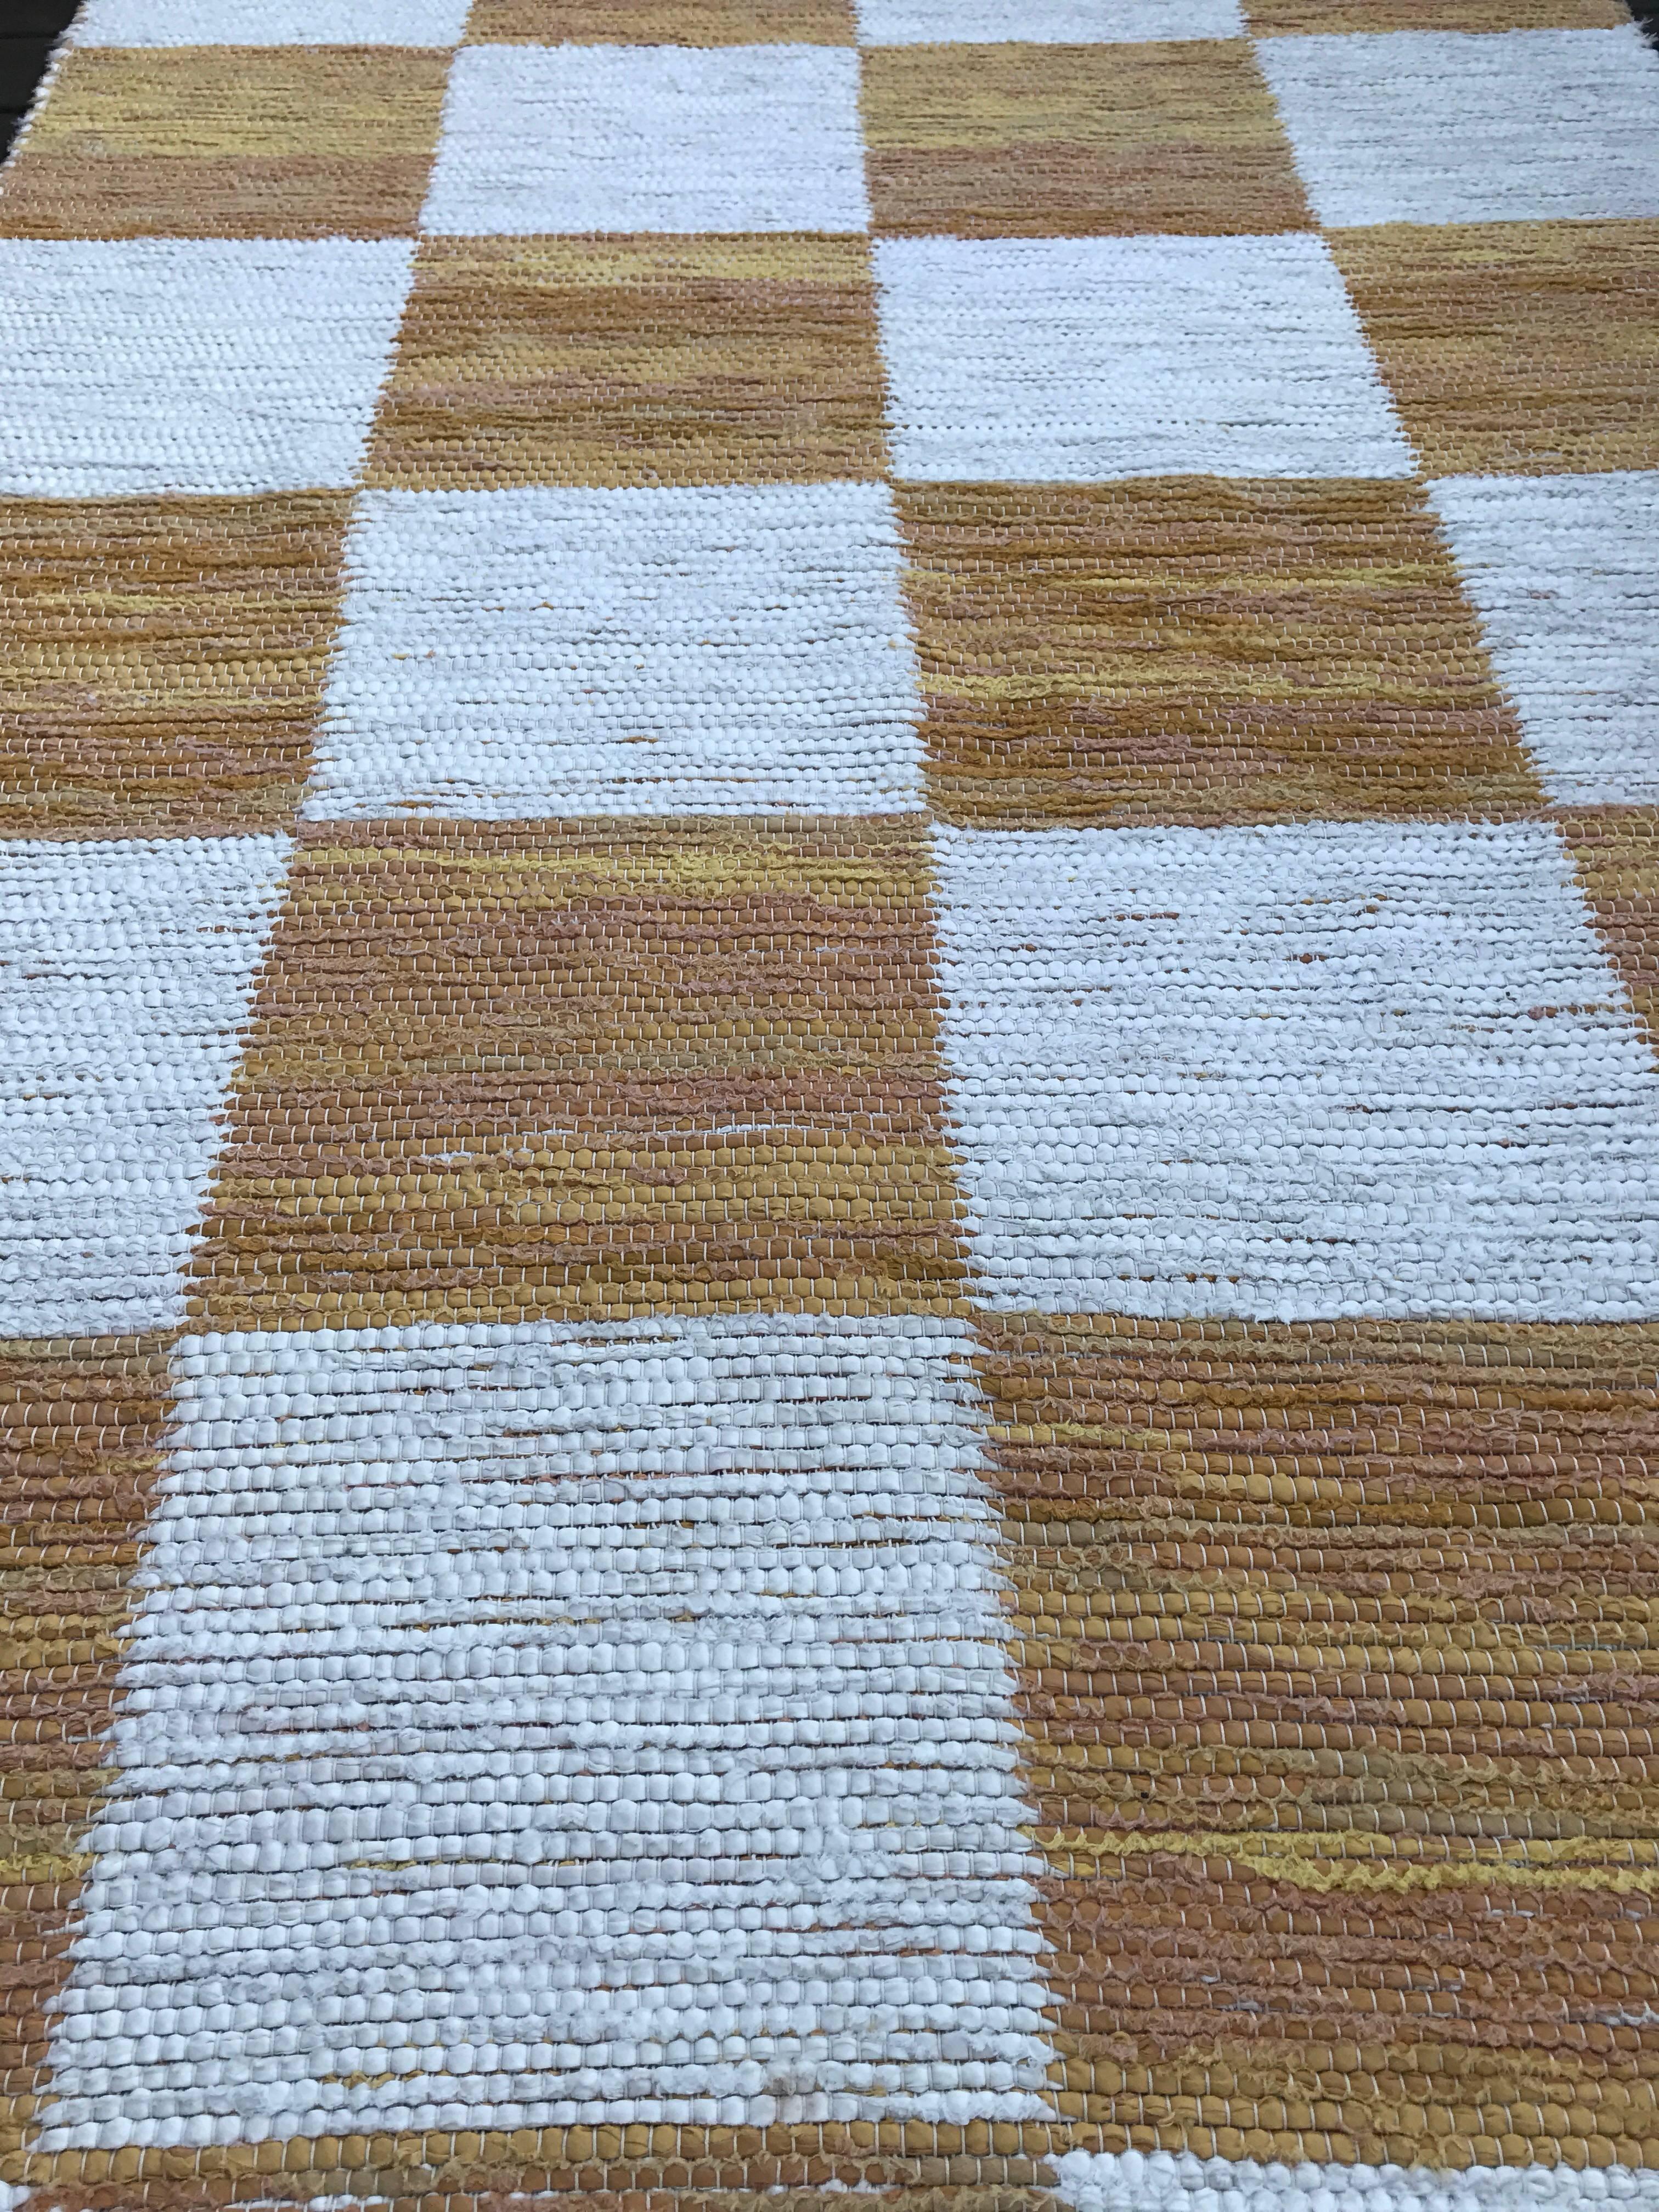 A very simple but beautiful white and yellow square flat-weave cotton carpet made and sold by Svenskt Tenn. It measures 232cm long and 125cm wide.